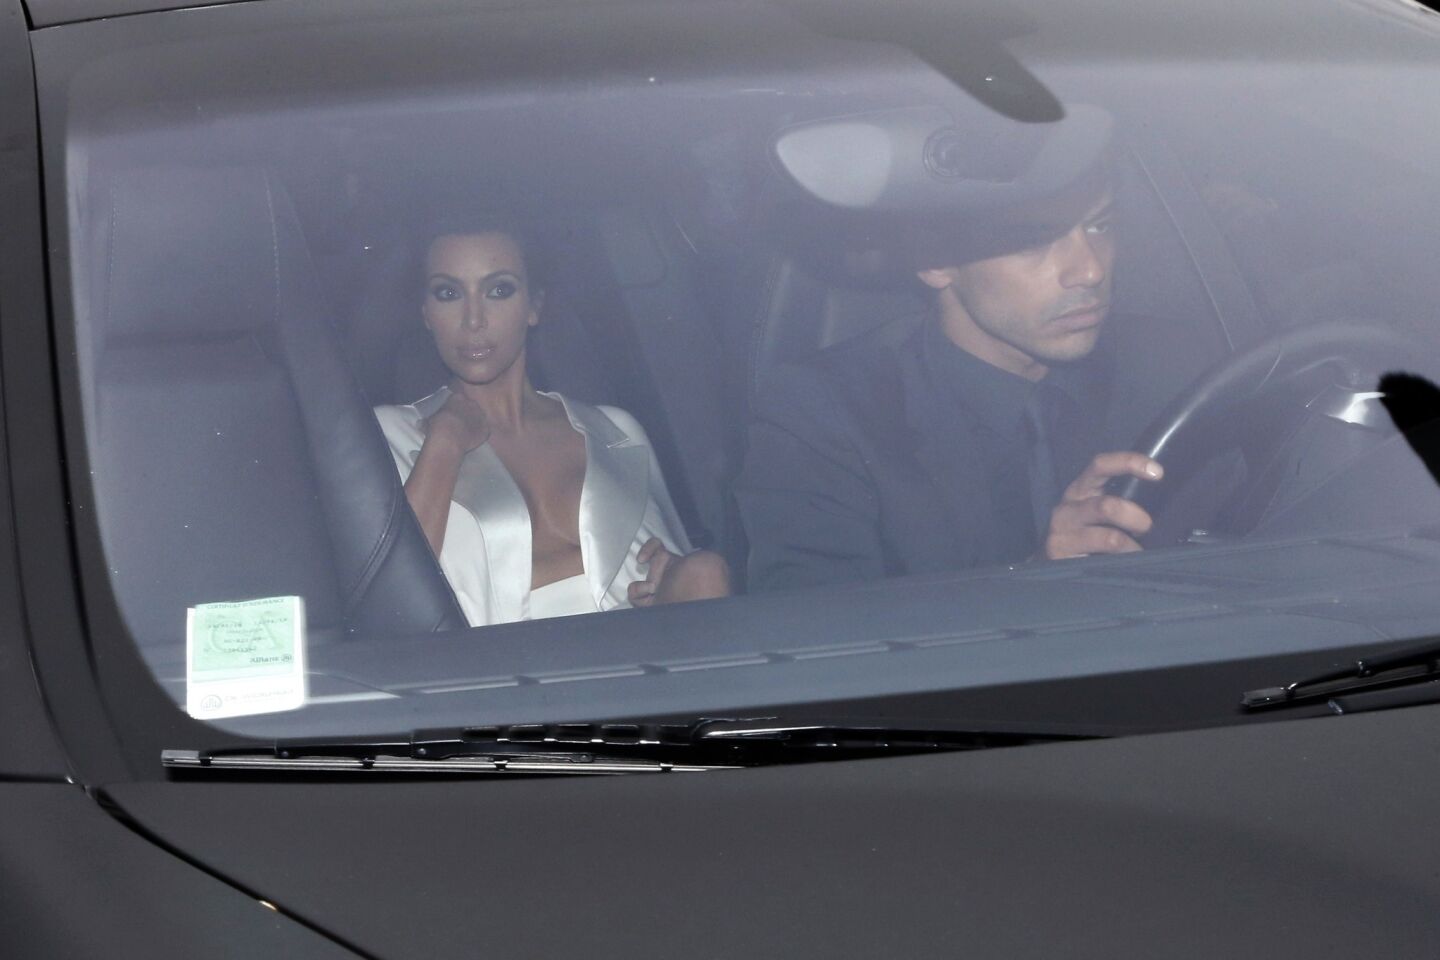 Kim Kardashian of reality-TV fame arrives at the Palace of Versailles on May 23.